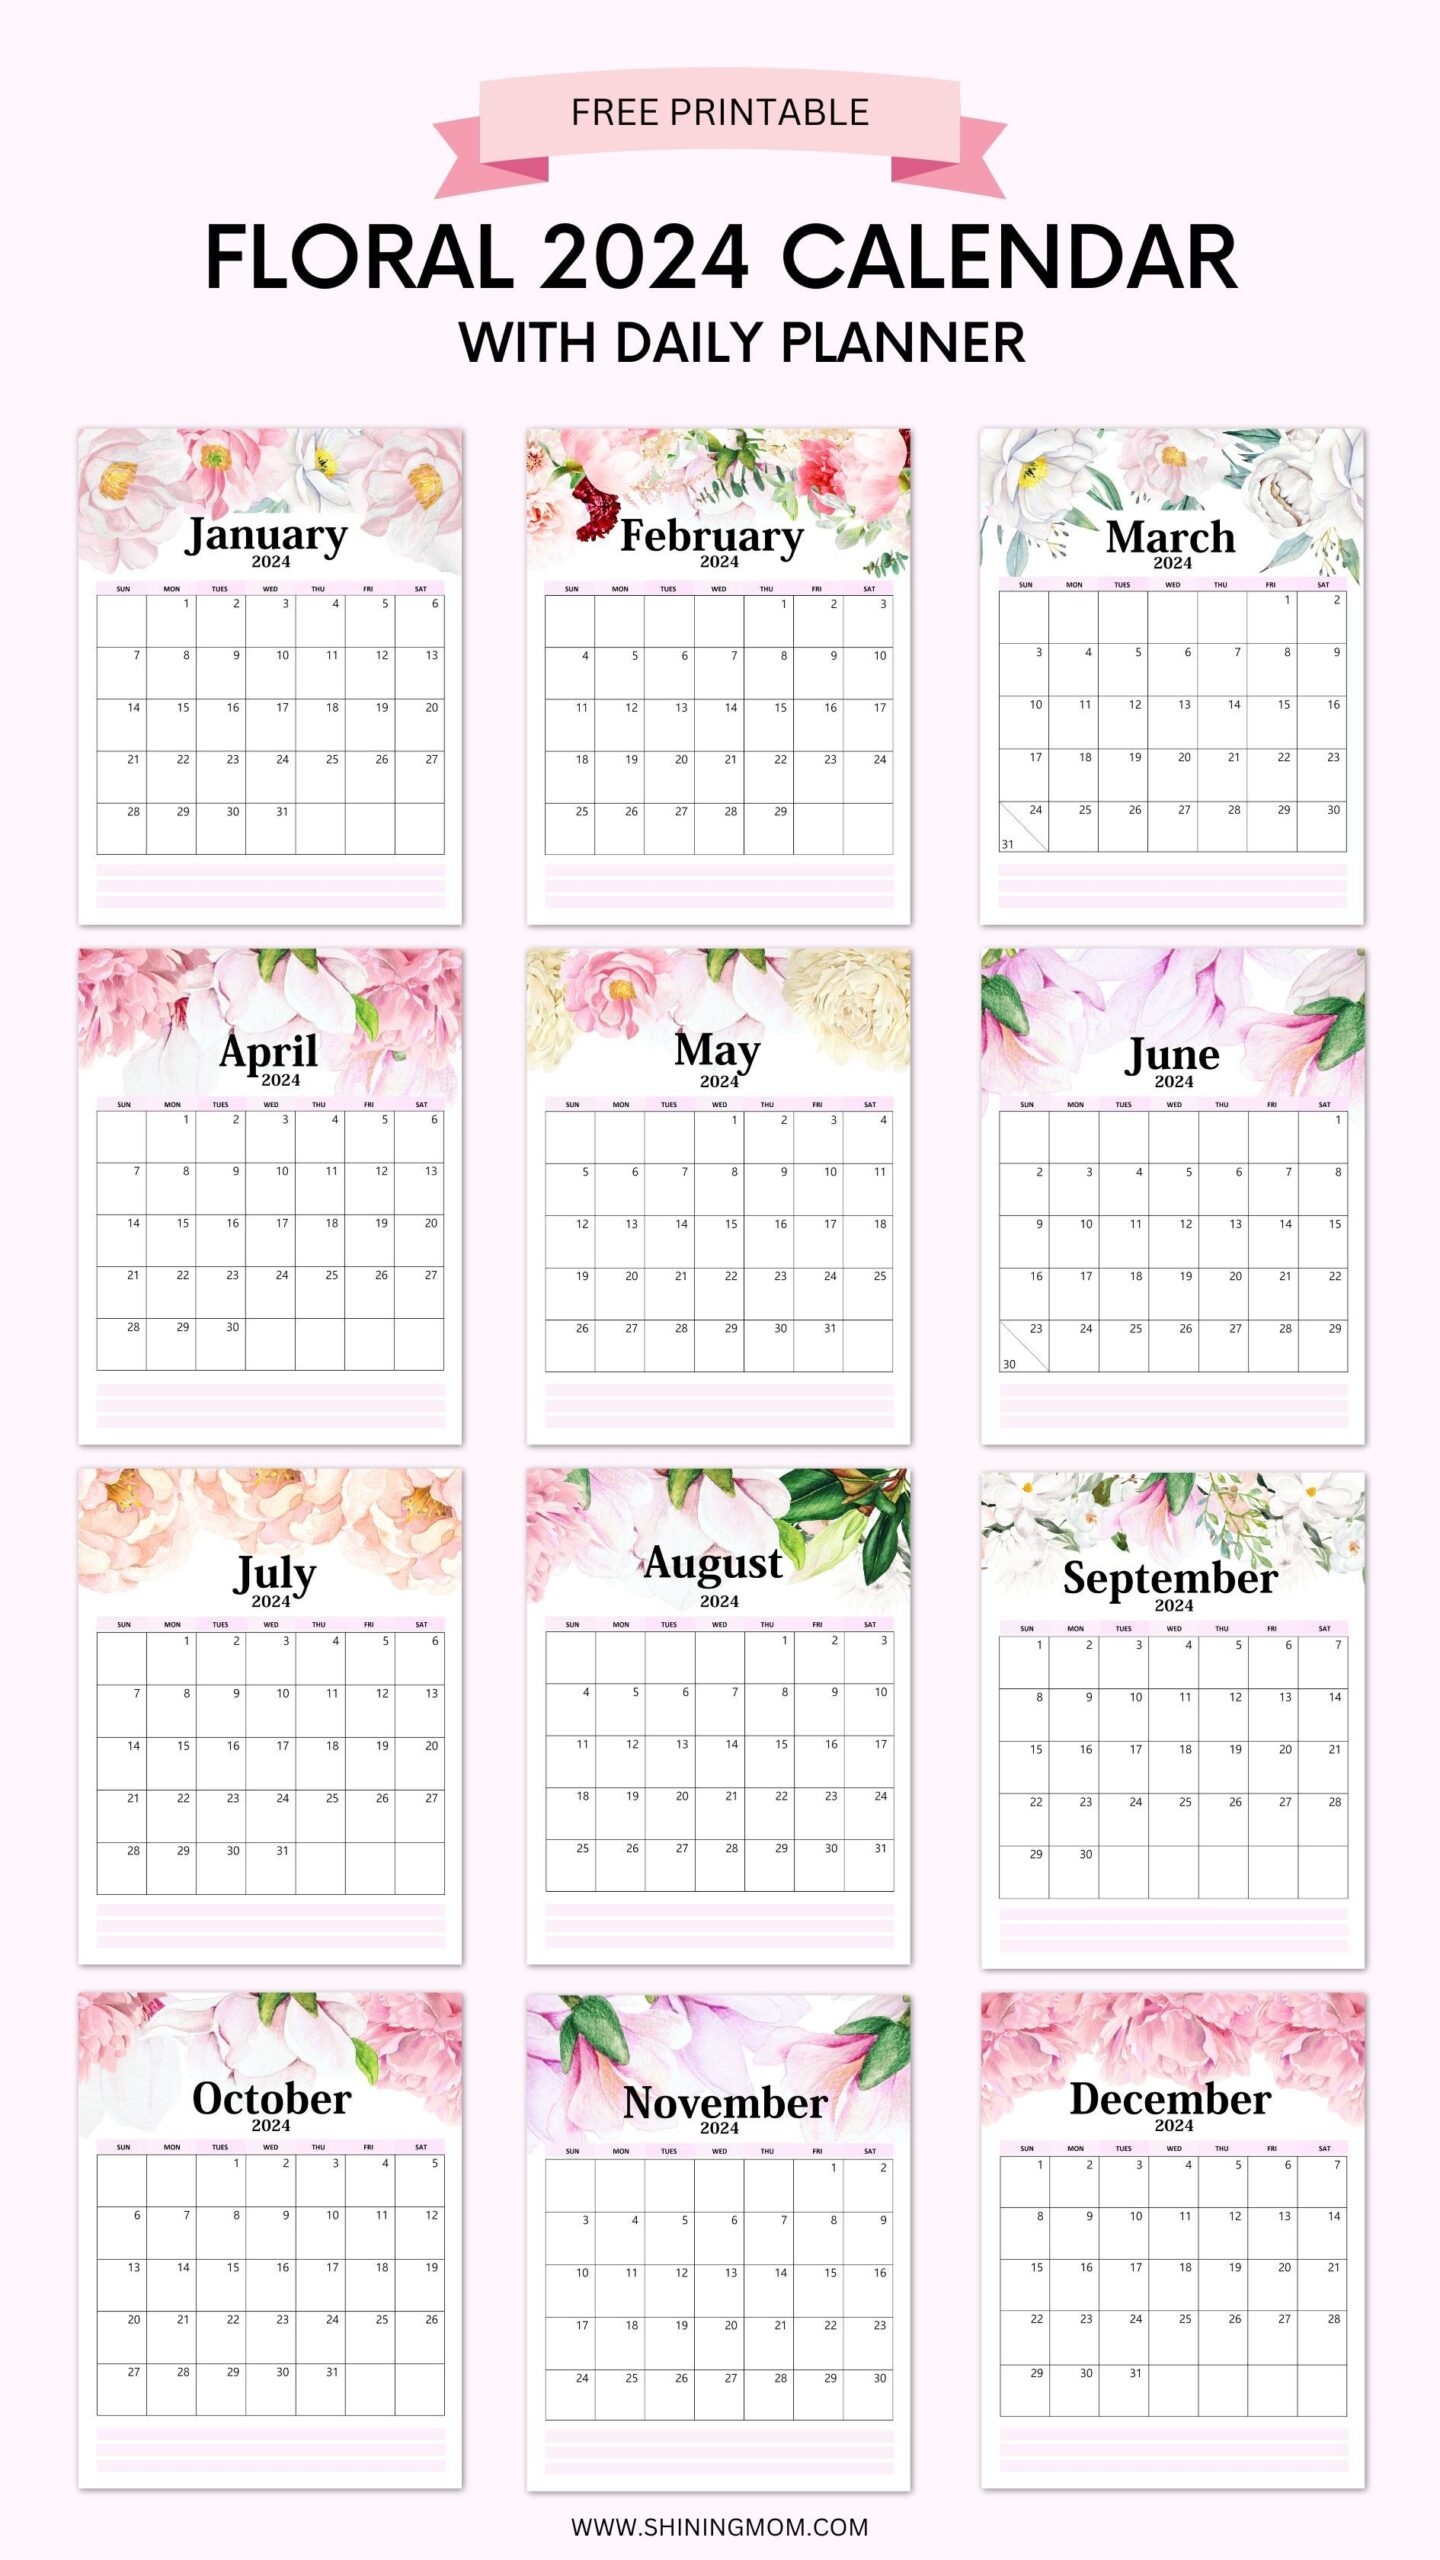 Your Free 2024 Floral Calendar Printable Is Here! | Calendar pertaining to Free Printable Calendar 2024 South Africa